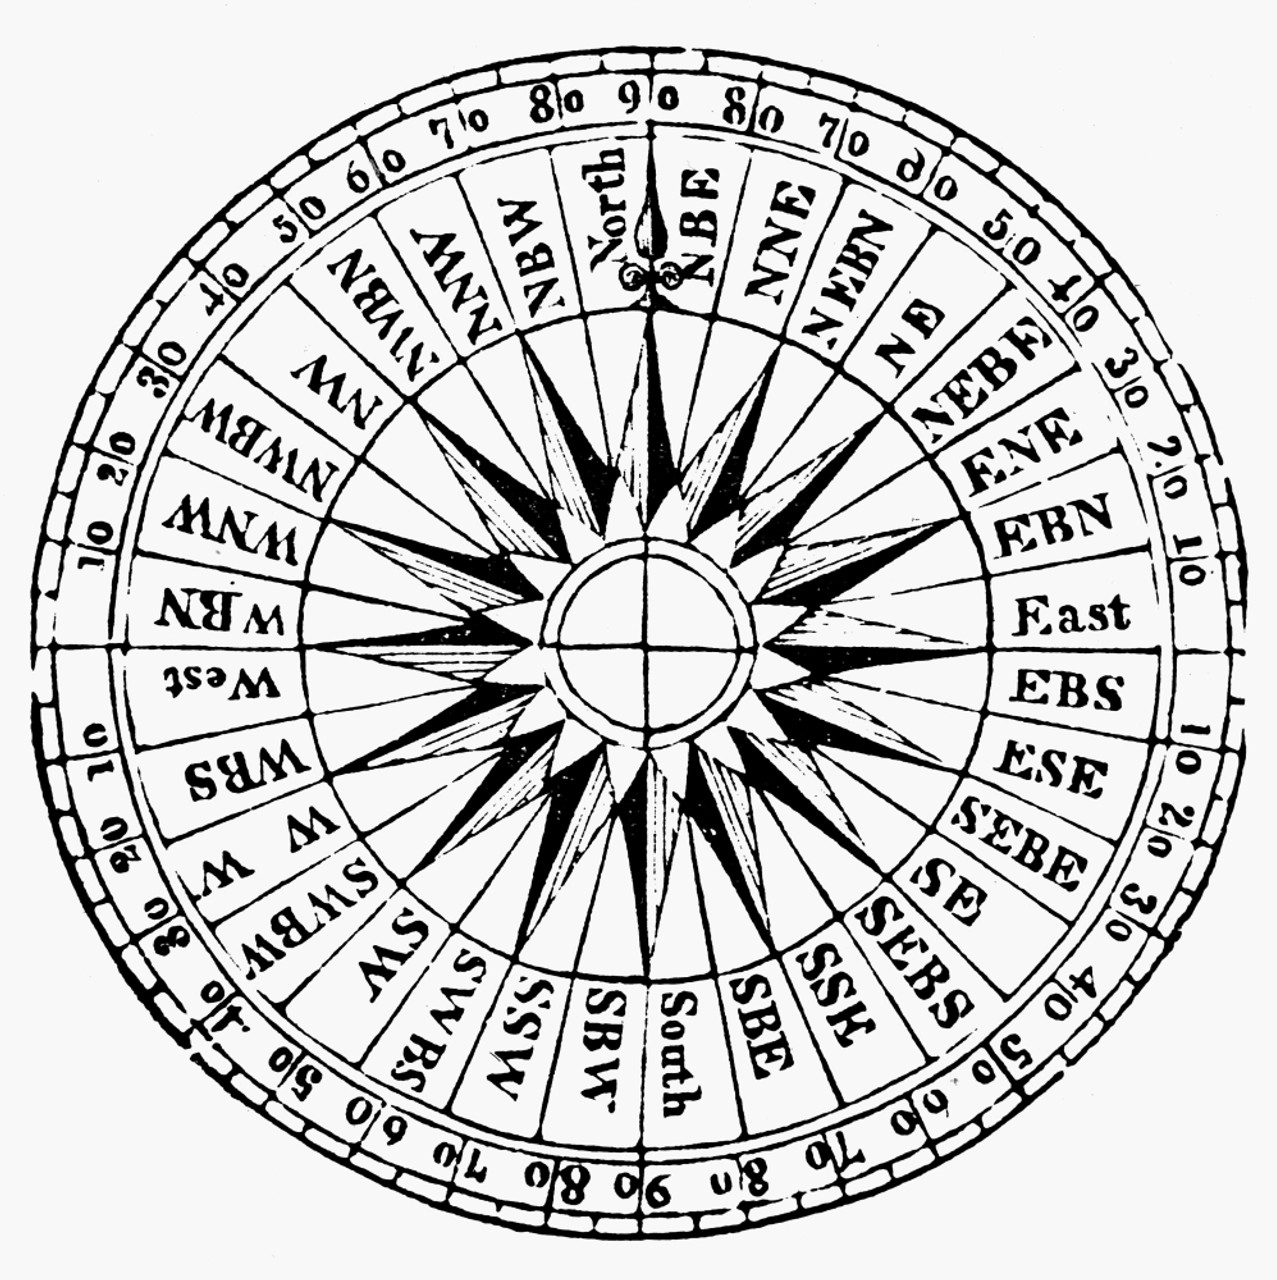 Image compass rose - free printable images - Img 28086.